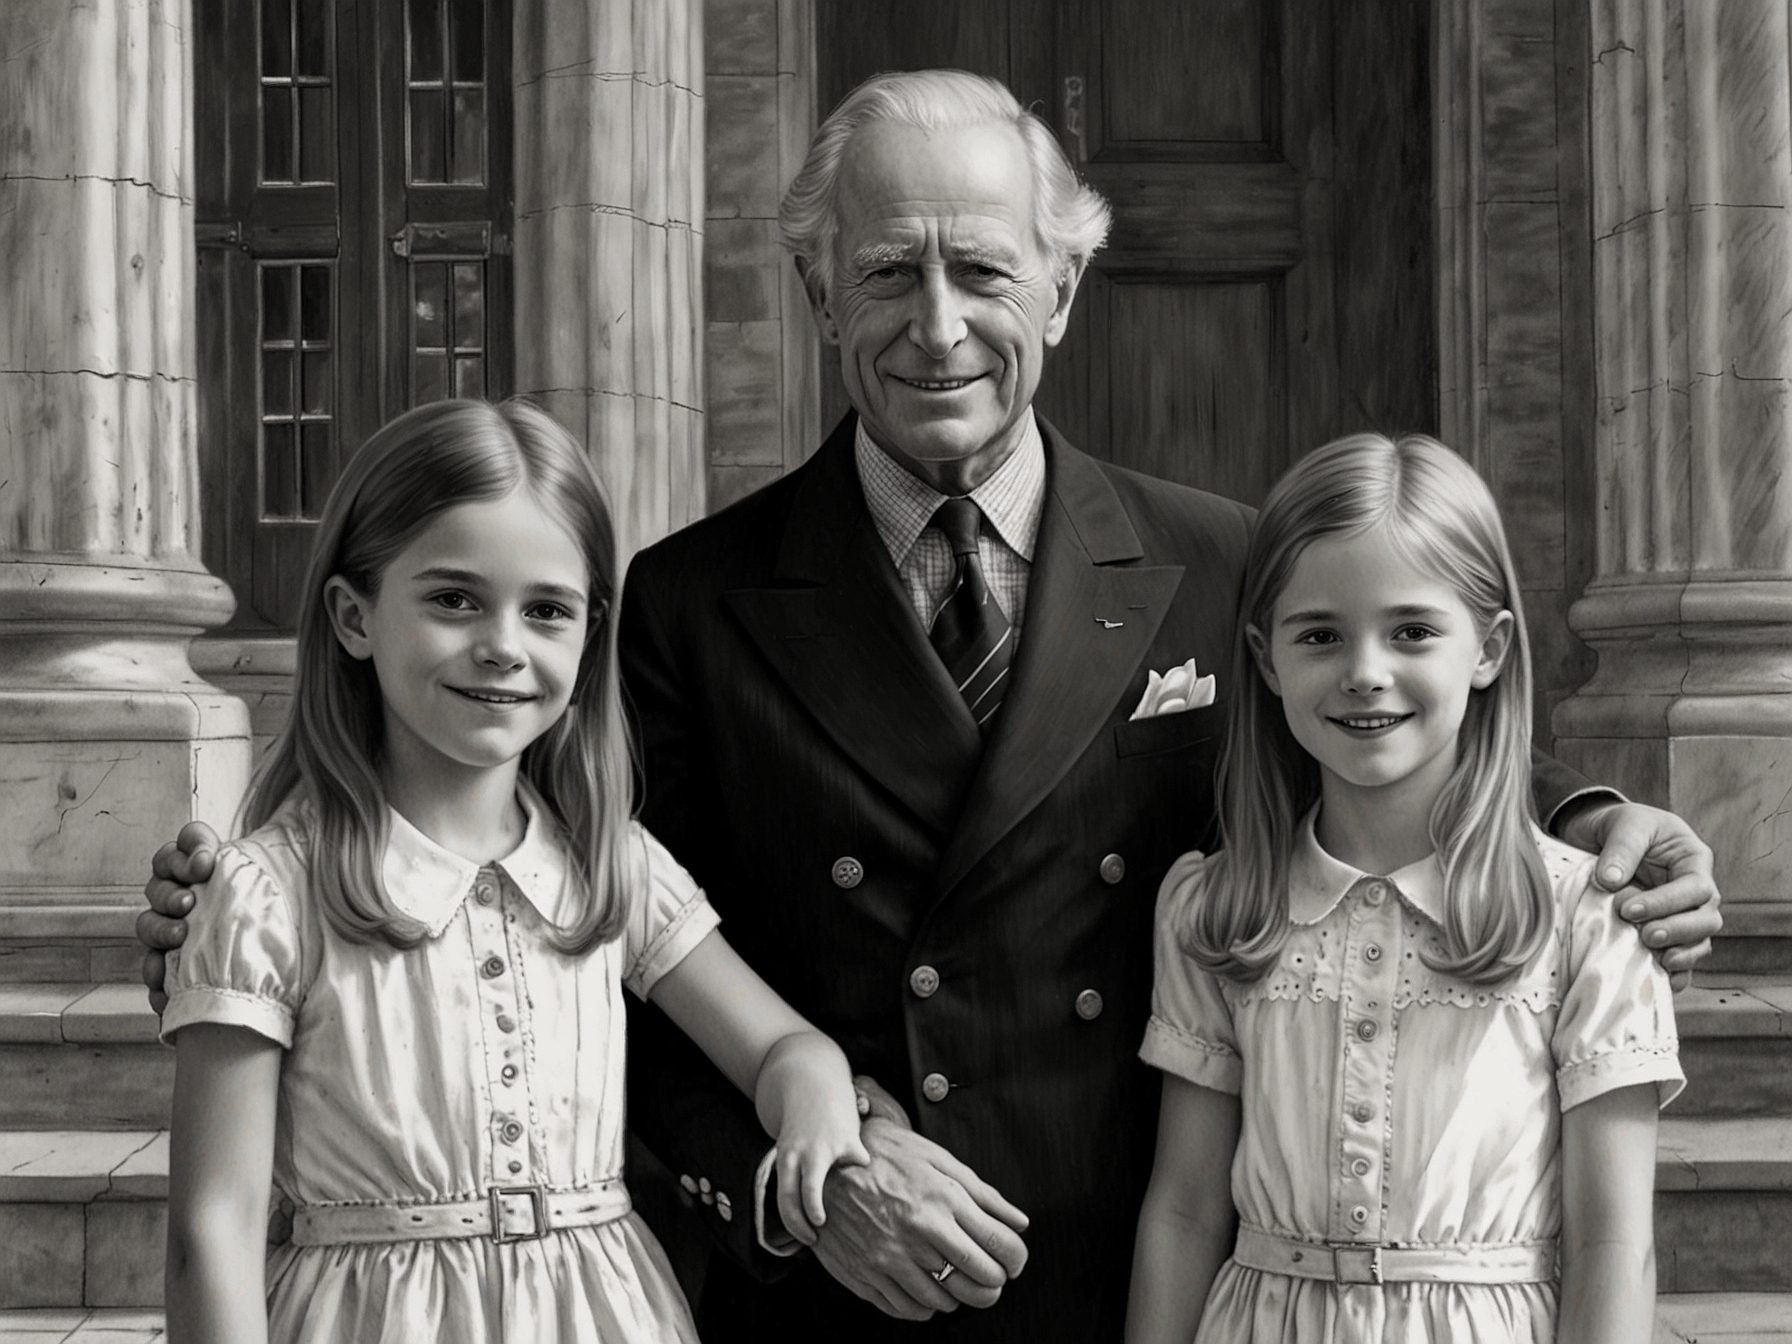 A heartwarming scene of King Charles III with his grandchildren, Archie and Lilibet, emphasizing the importance he places on family unity and British heritage.